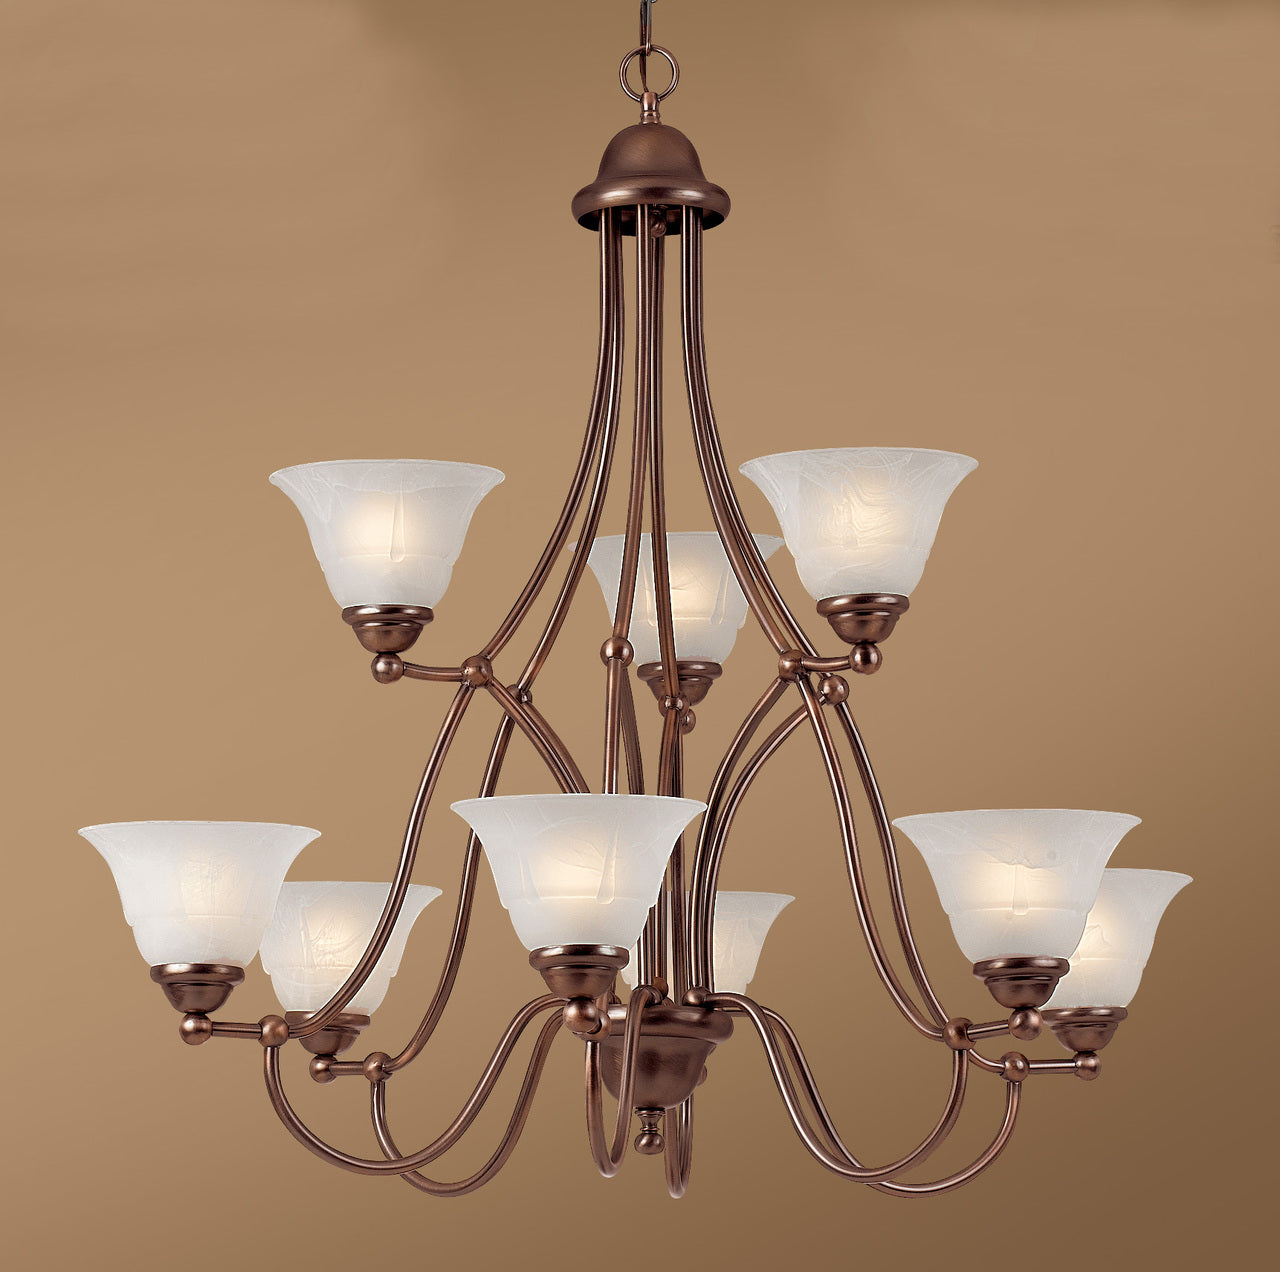 Classic Lighting 69628 ACP WAG Providence Glass/Steel Chandelier in Antique Copper